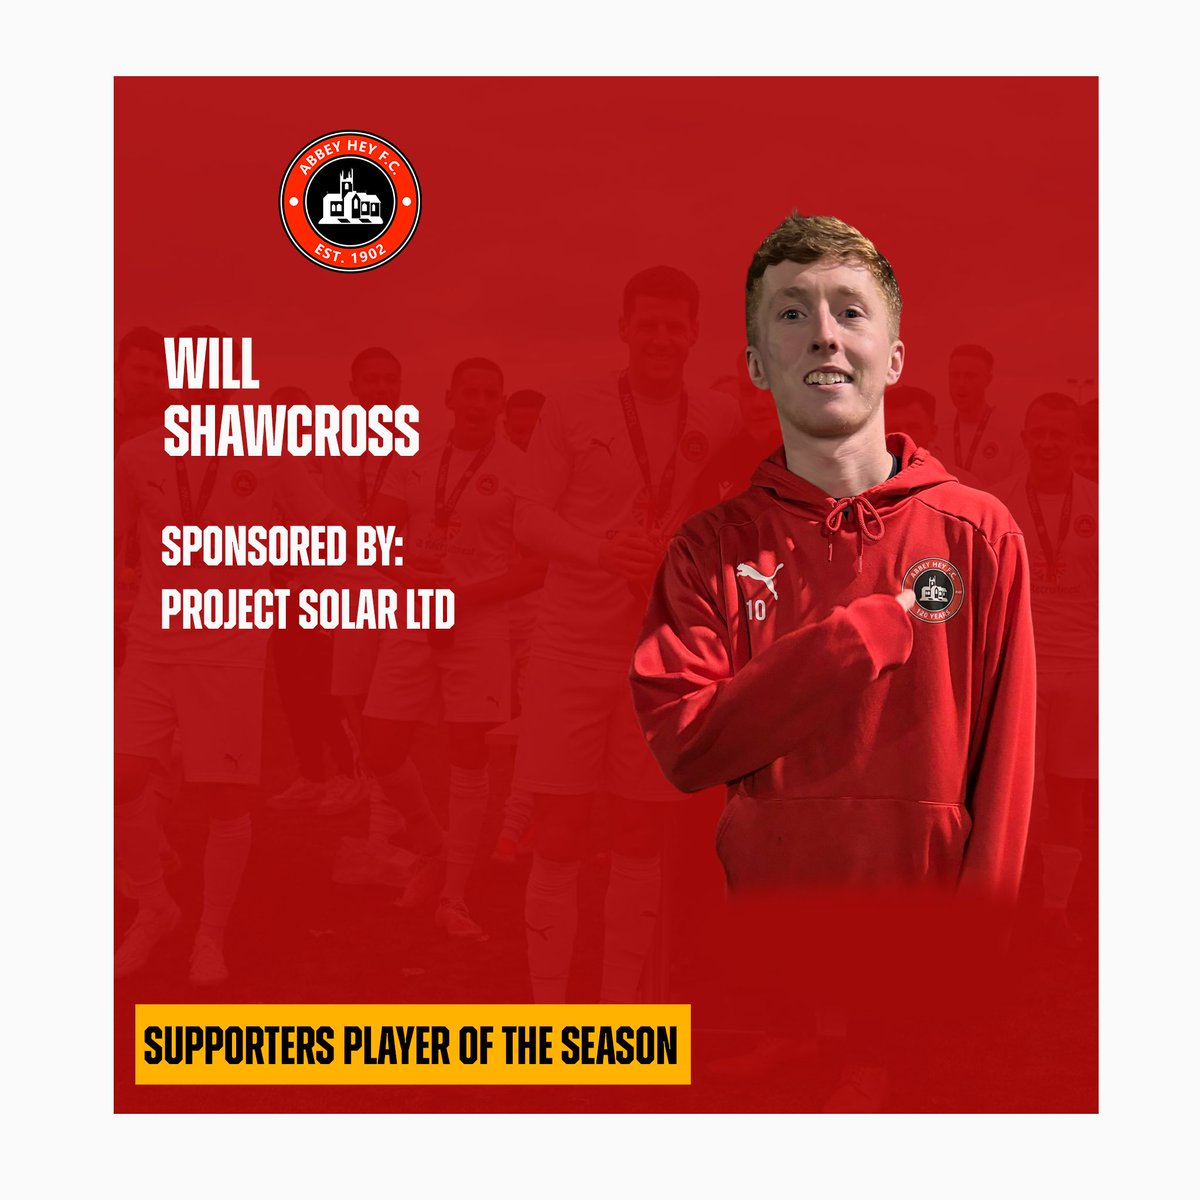 Your Supporters' Player Of The Season: Will Shawcross 👏 #uptheabbey